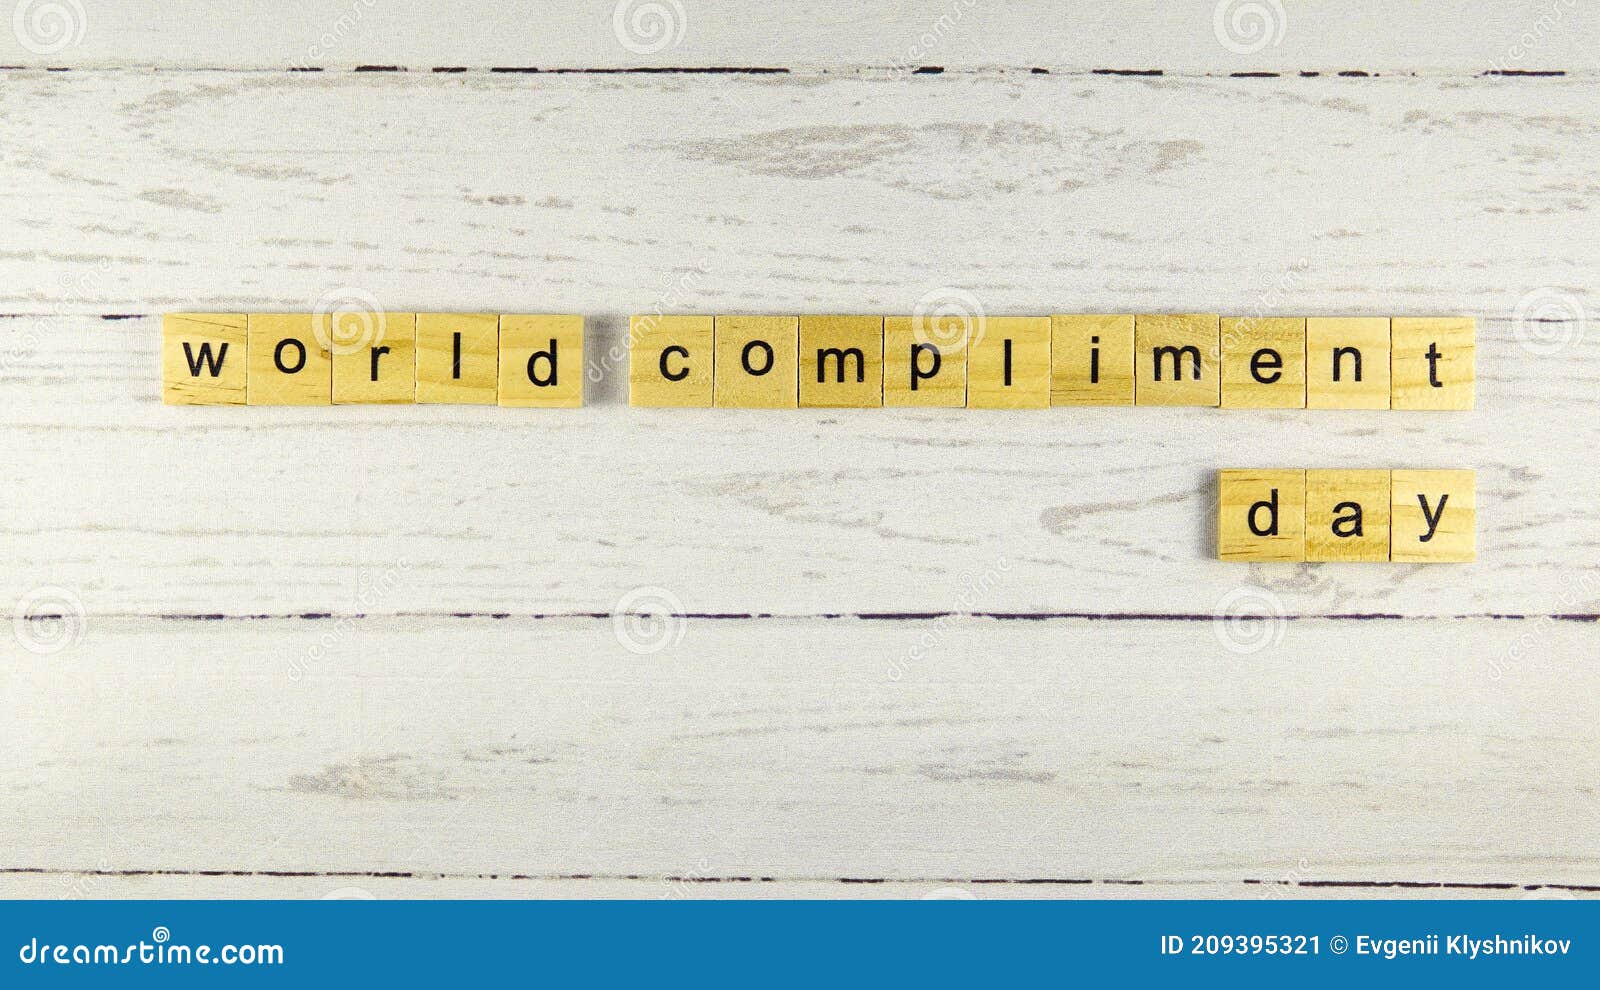 Compliment words a picture to Beautiful Comments